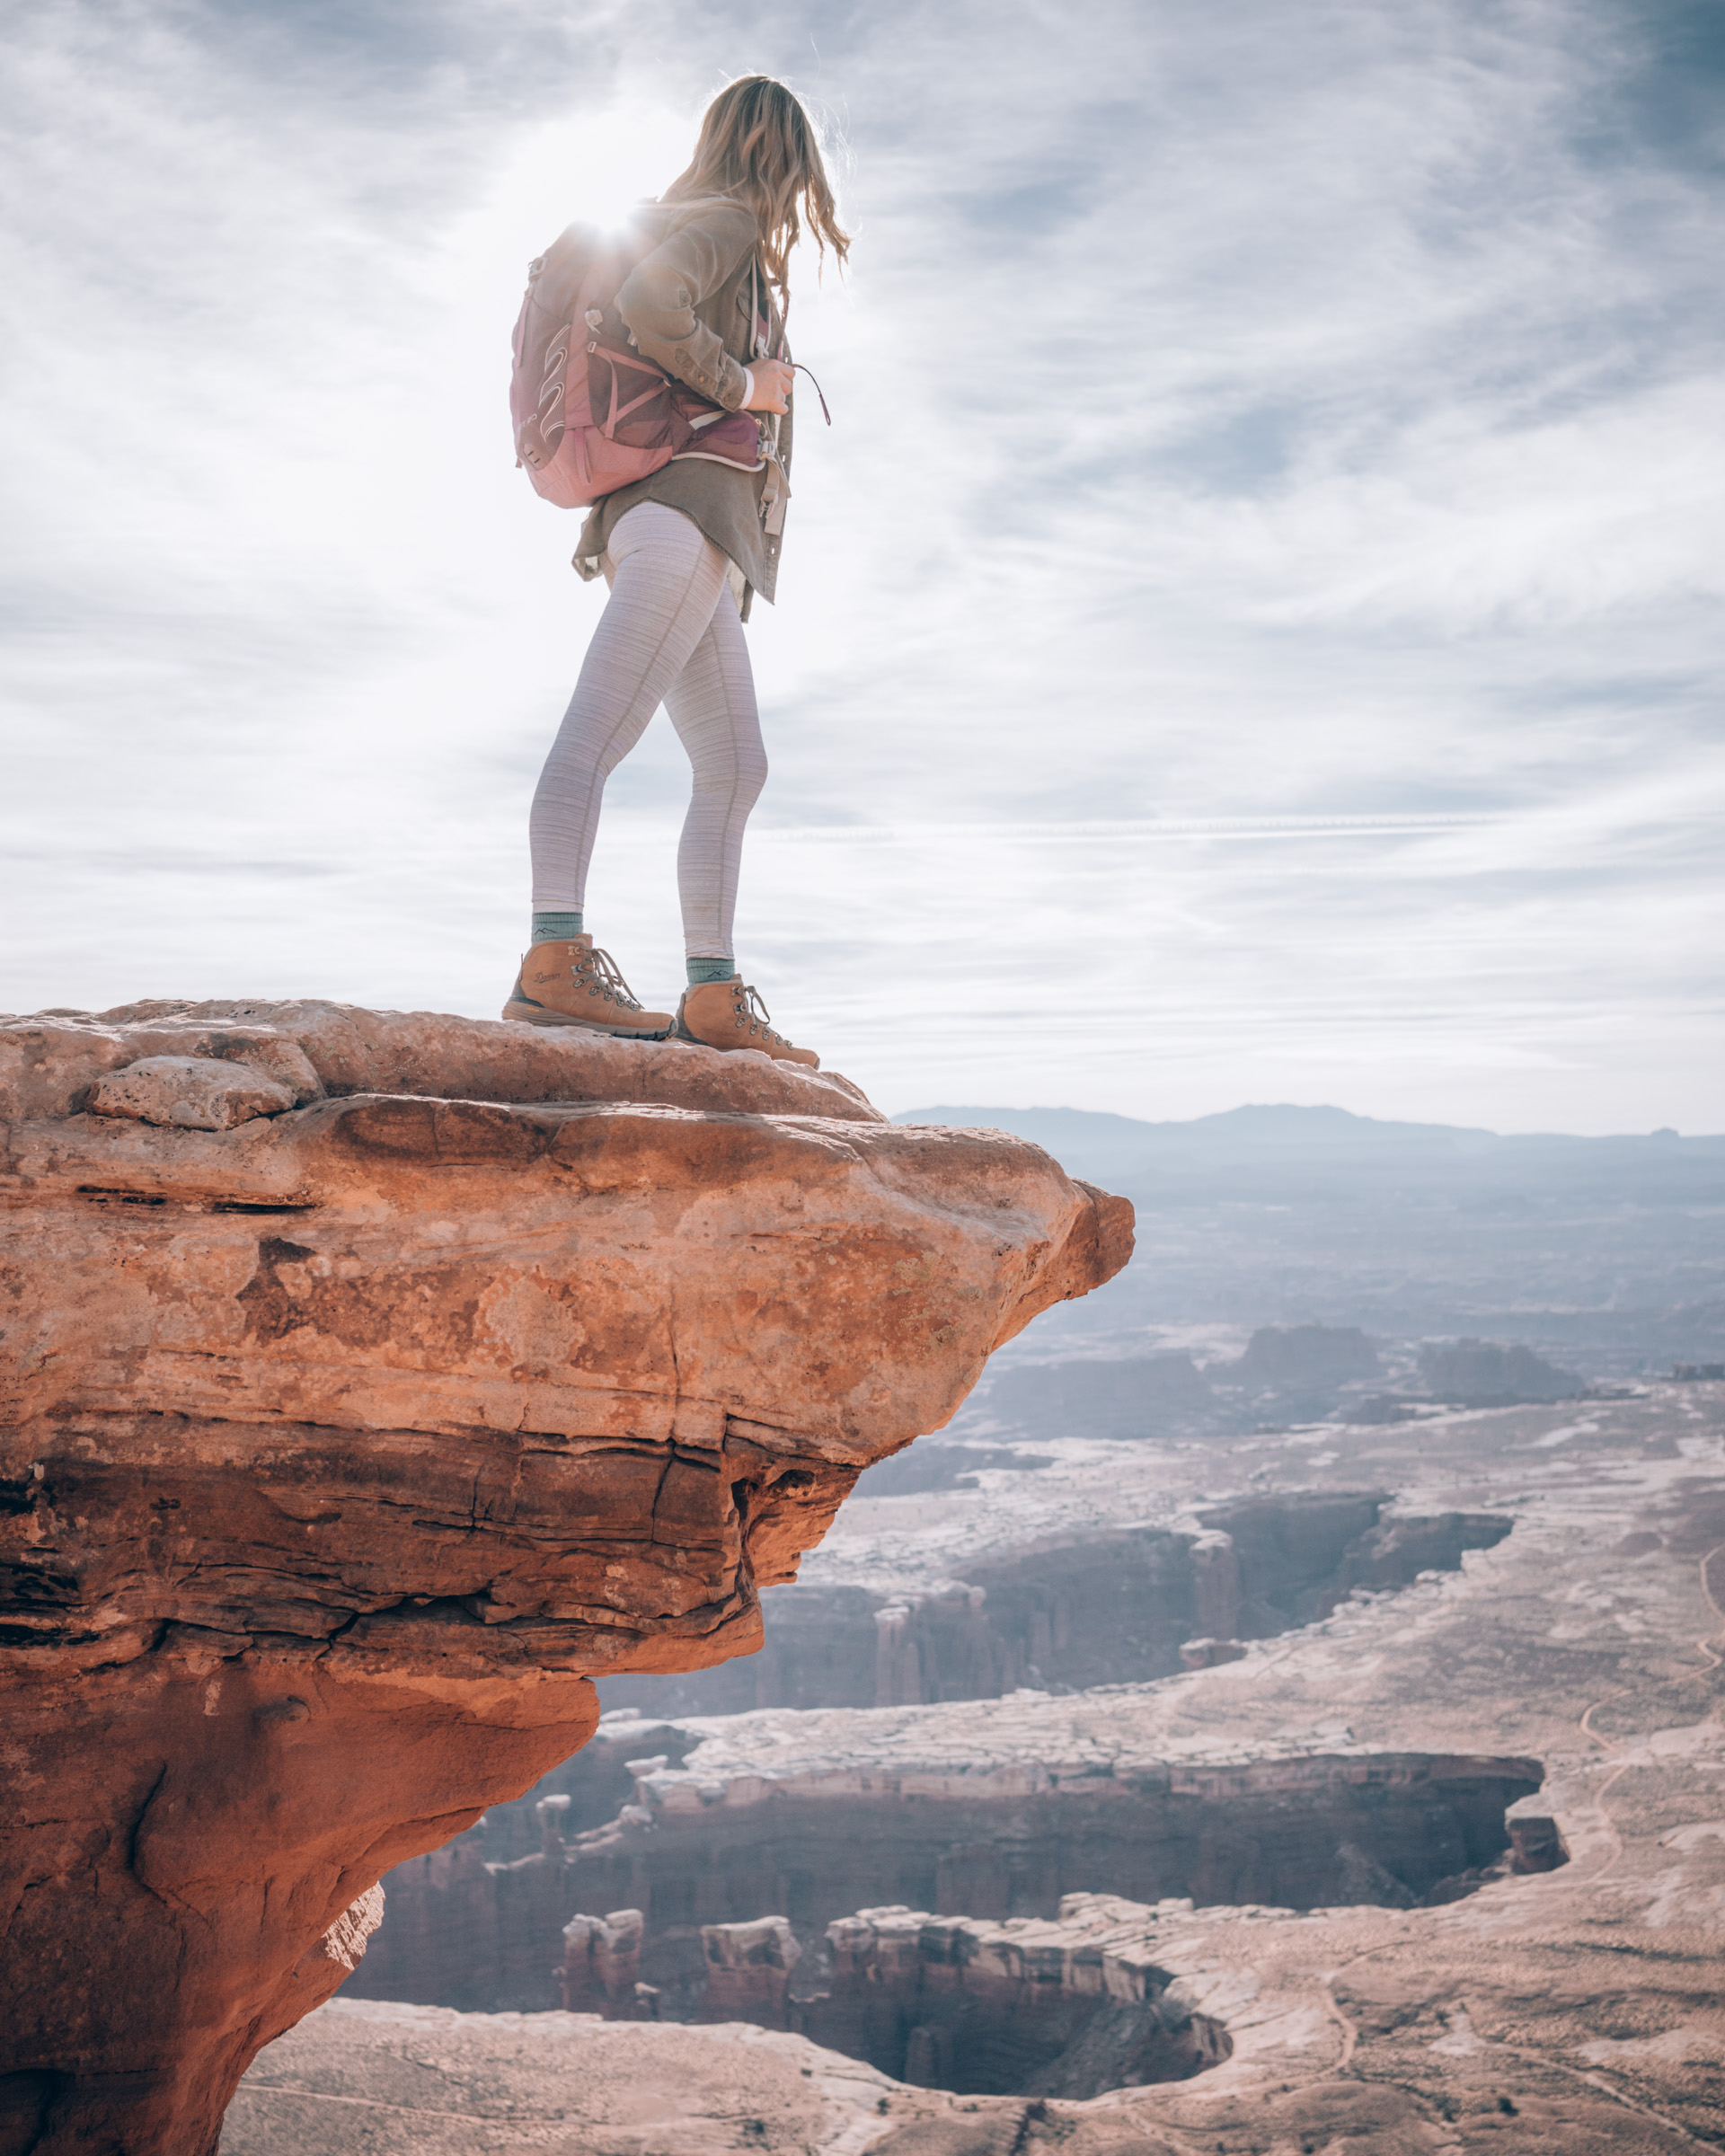 An athletic woman takes in the view at Island in the Sky, Canyonlands National Park